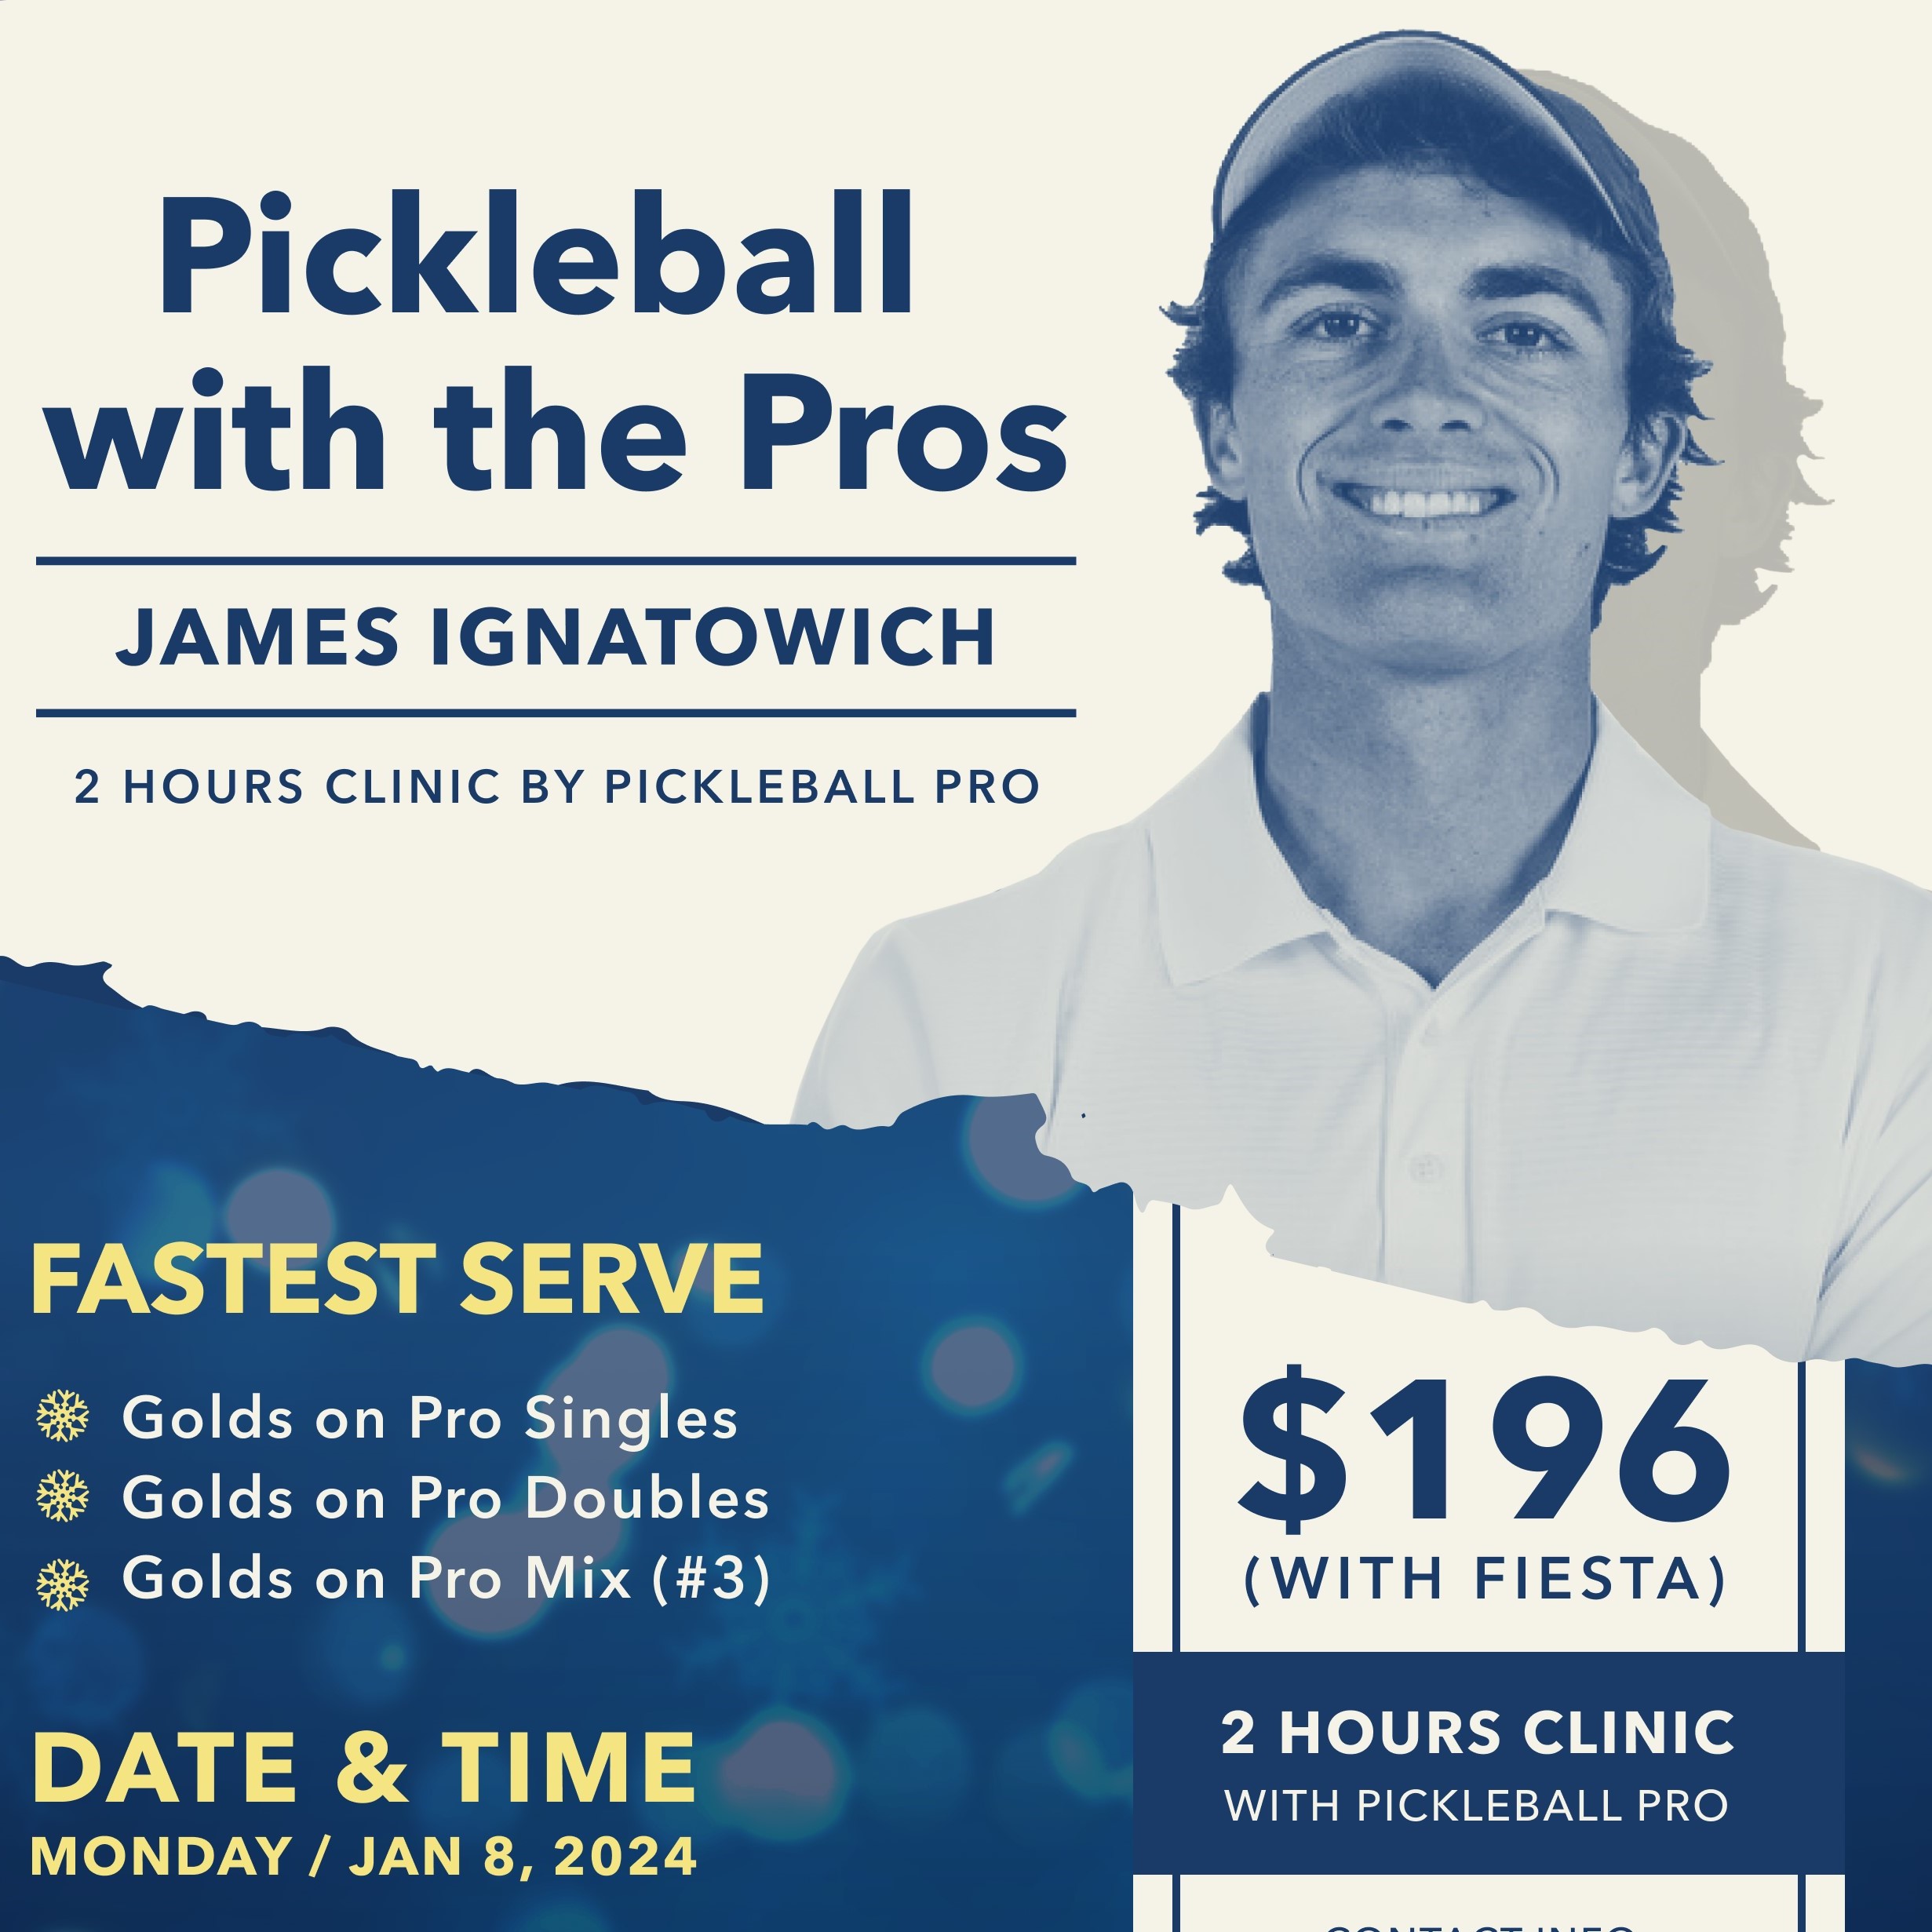 Brooksville Country Club Hosts Exclusive Pickleball Clinic with Pro James Ignatowich